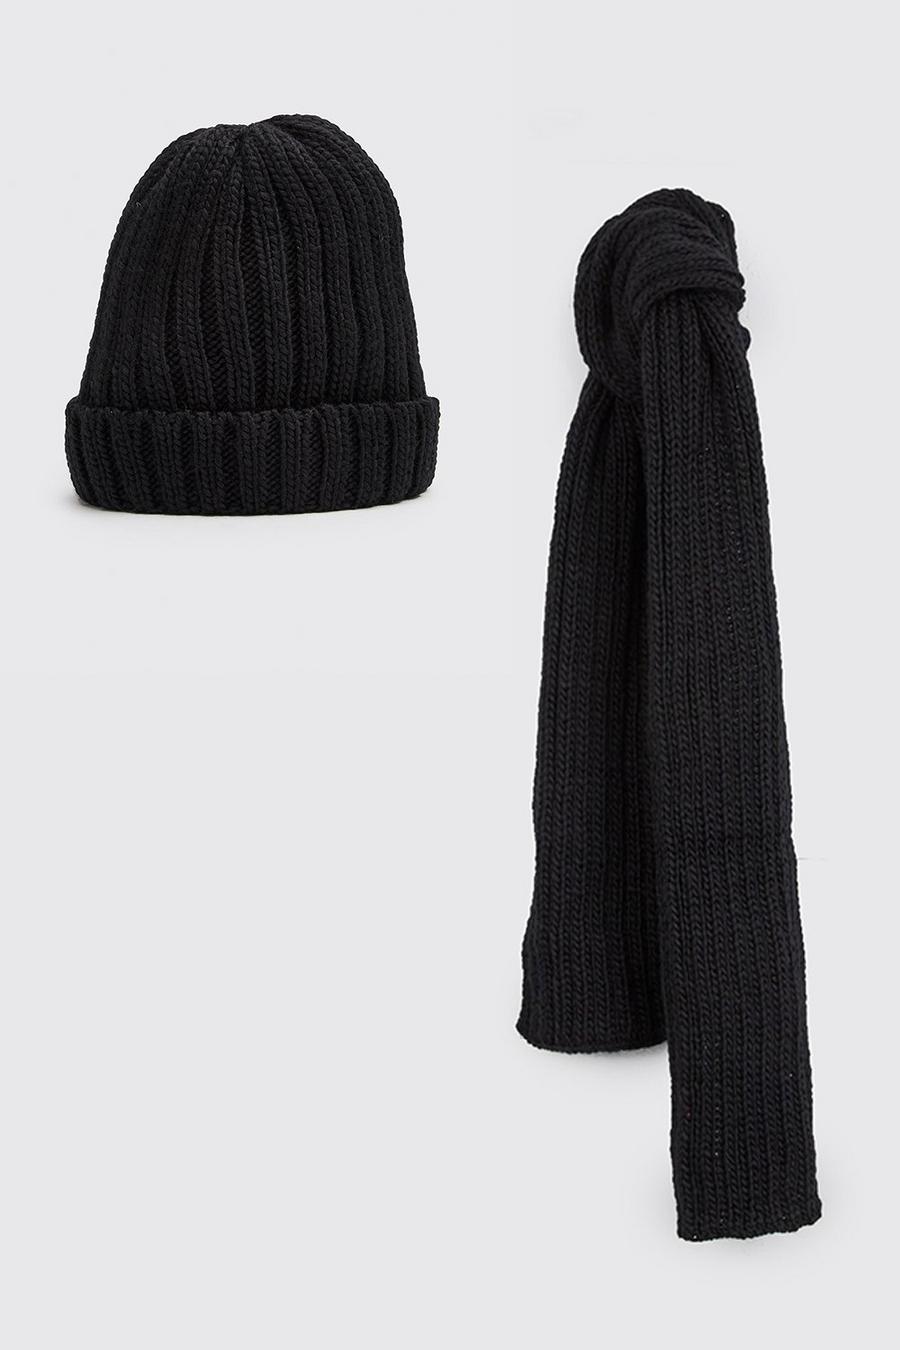 Black Fisherman Beanie And Scarf Set image number 1